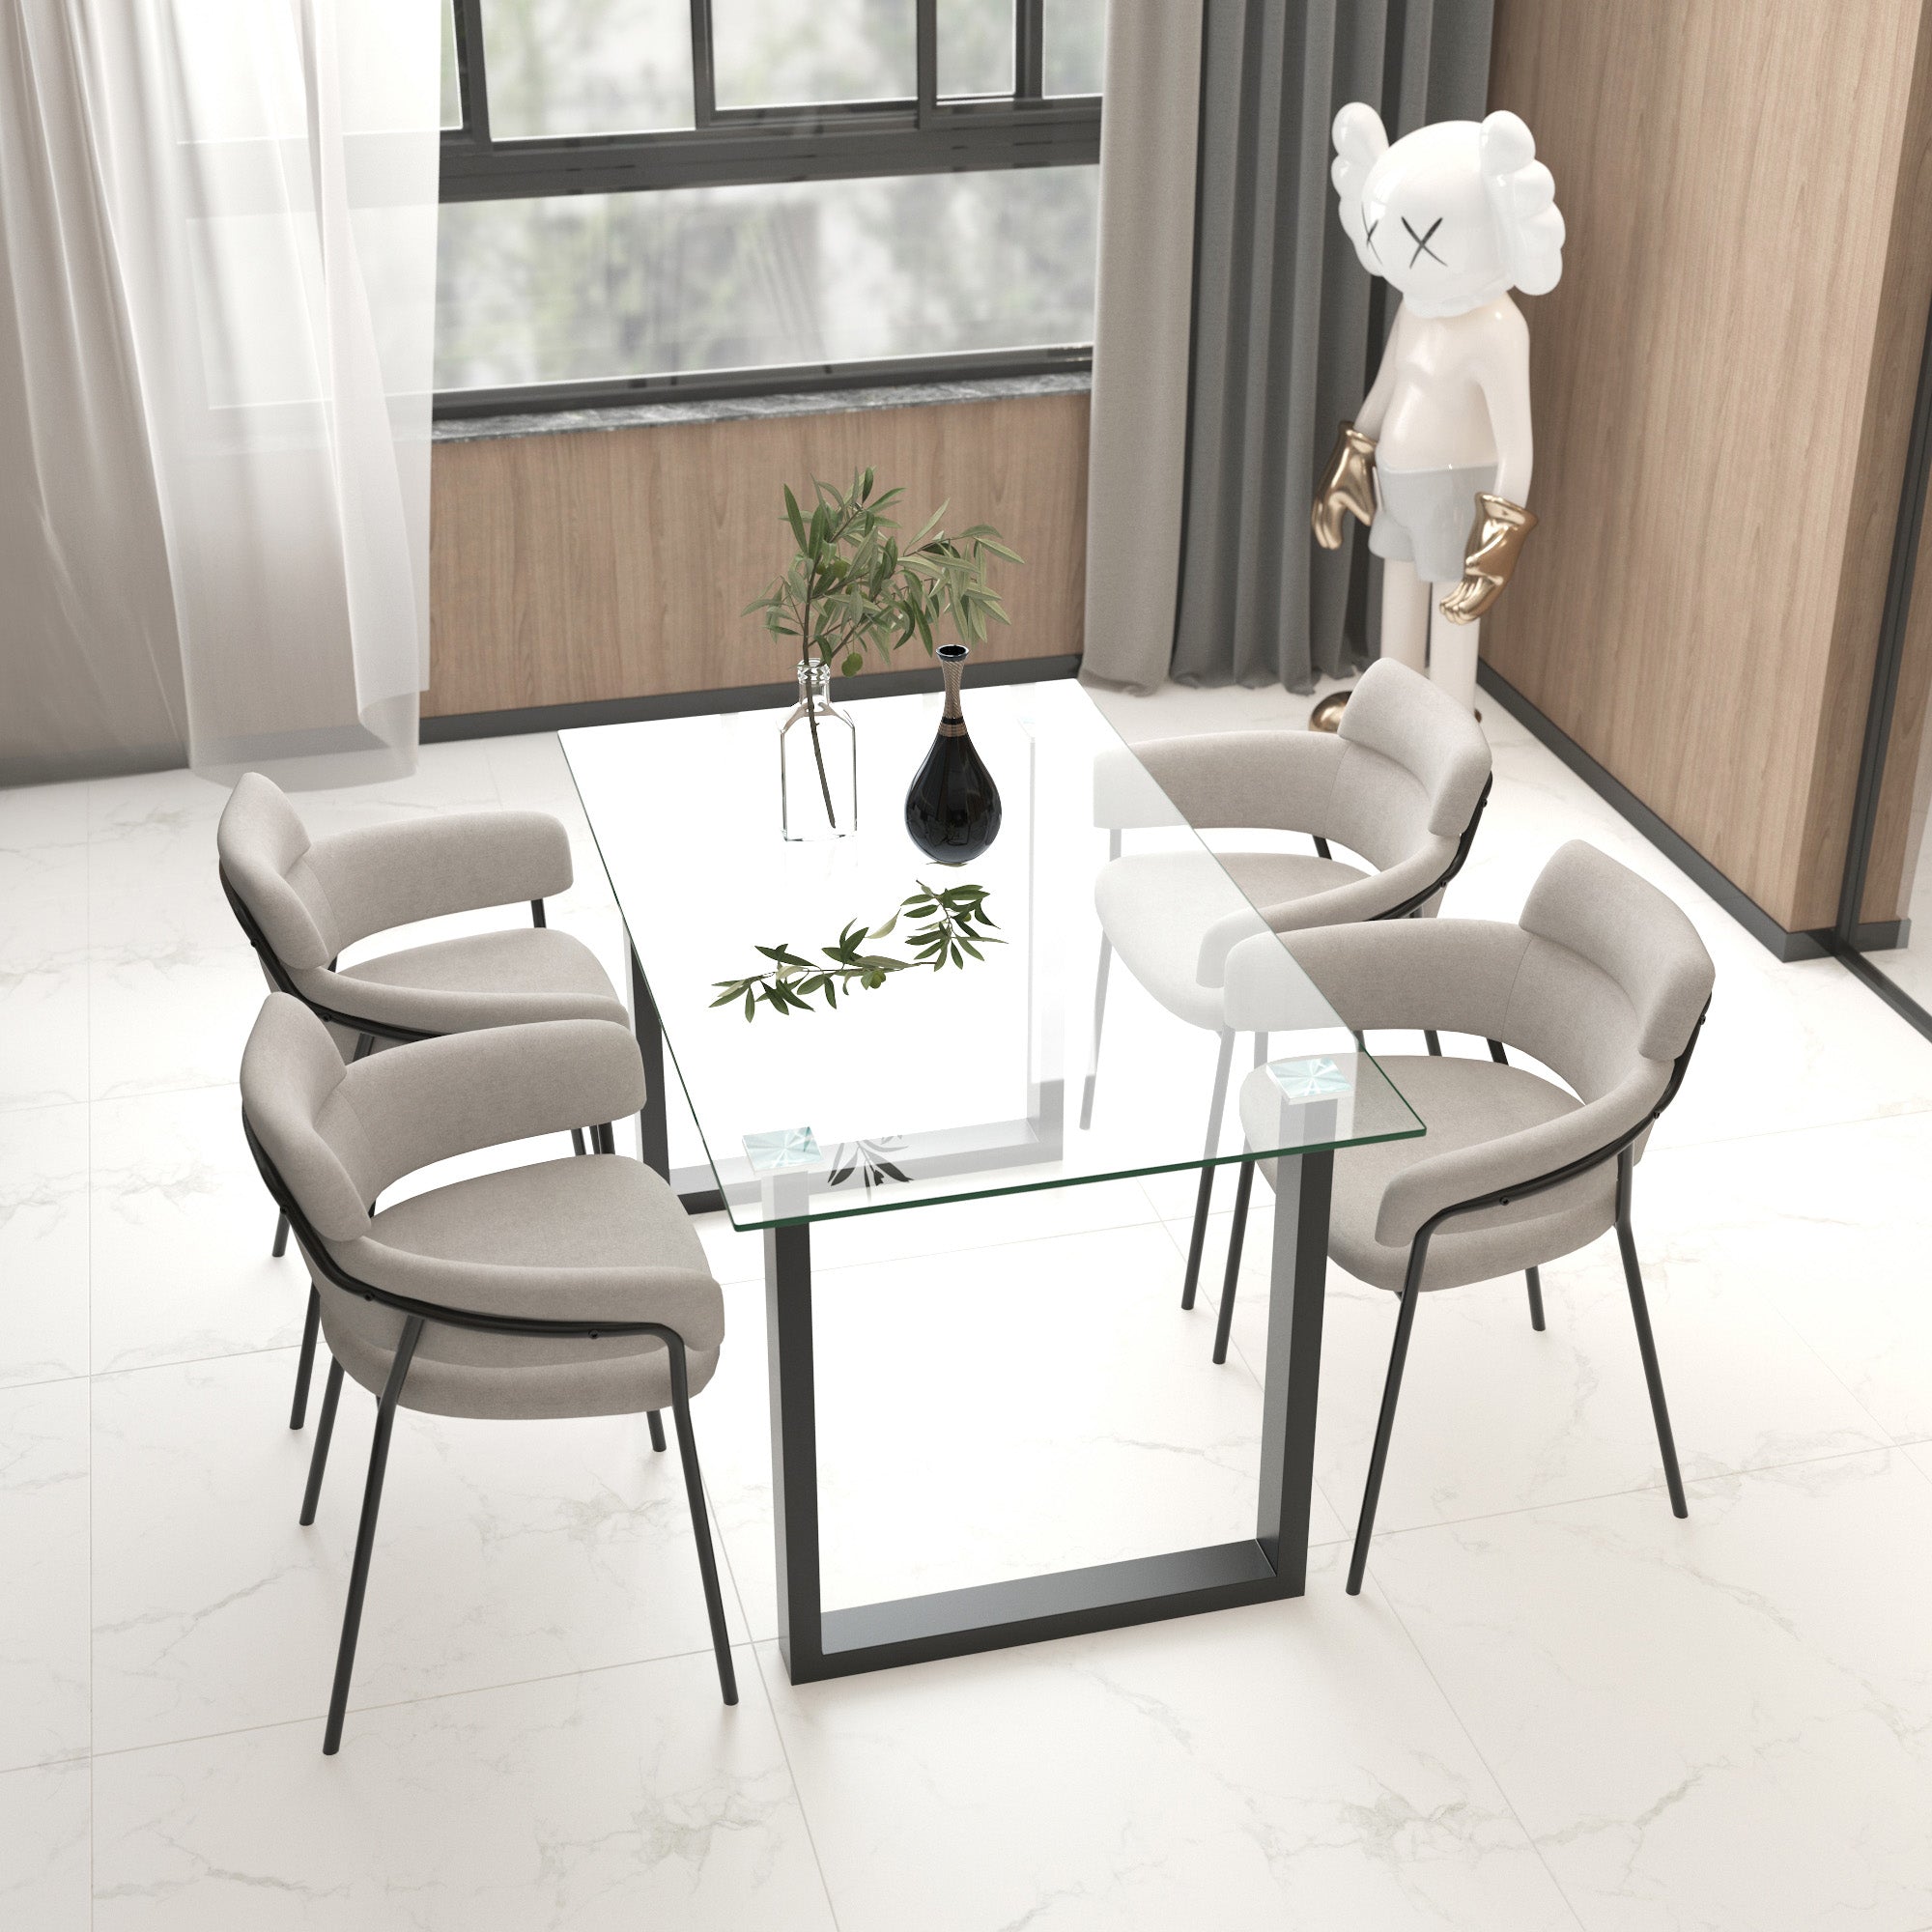 FRANCO 55" BLACK & GLASS DINING TABLE / AXEL GREY CHAIRS - 5PC DINING SET